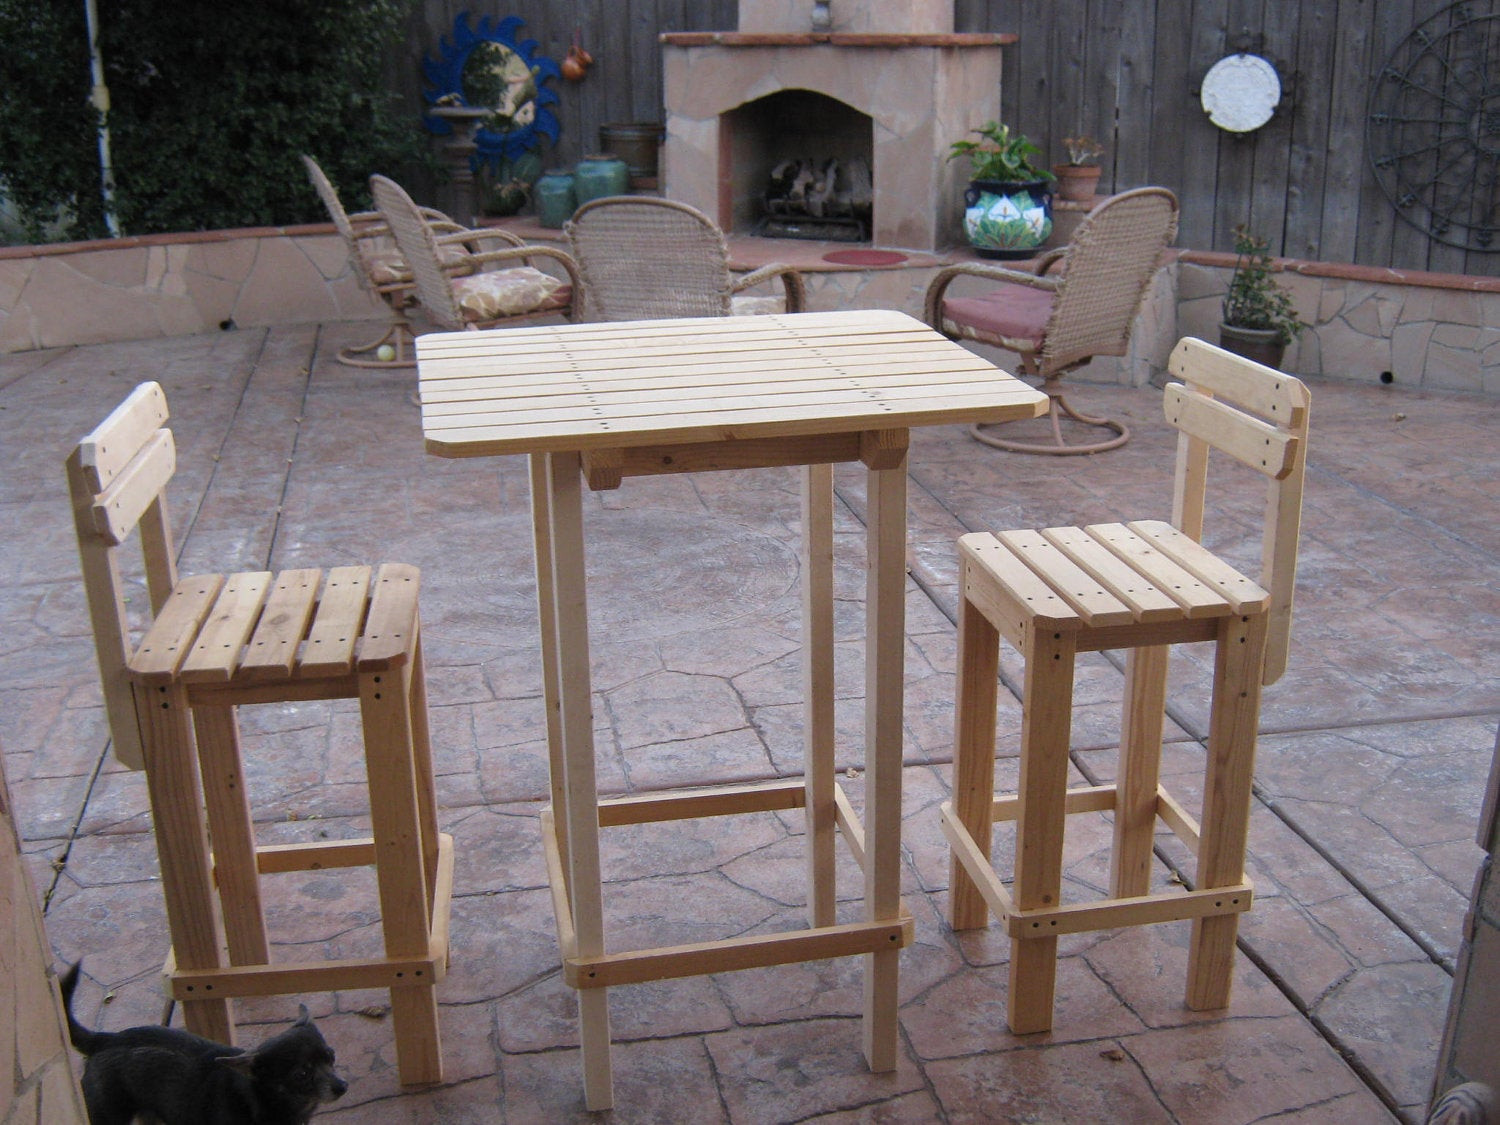 DIY Outdoor Bar Table
 DIY PLANS to make Bar Table and Stool Set by wingstoshop